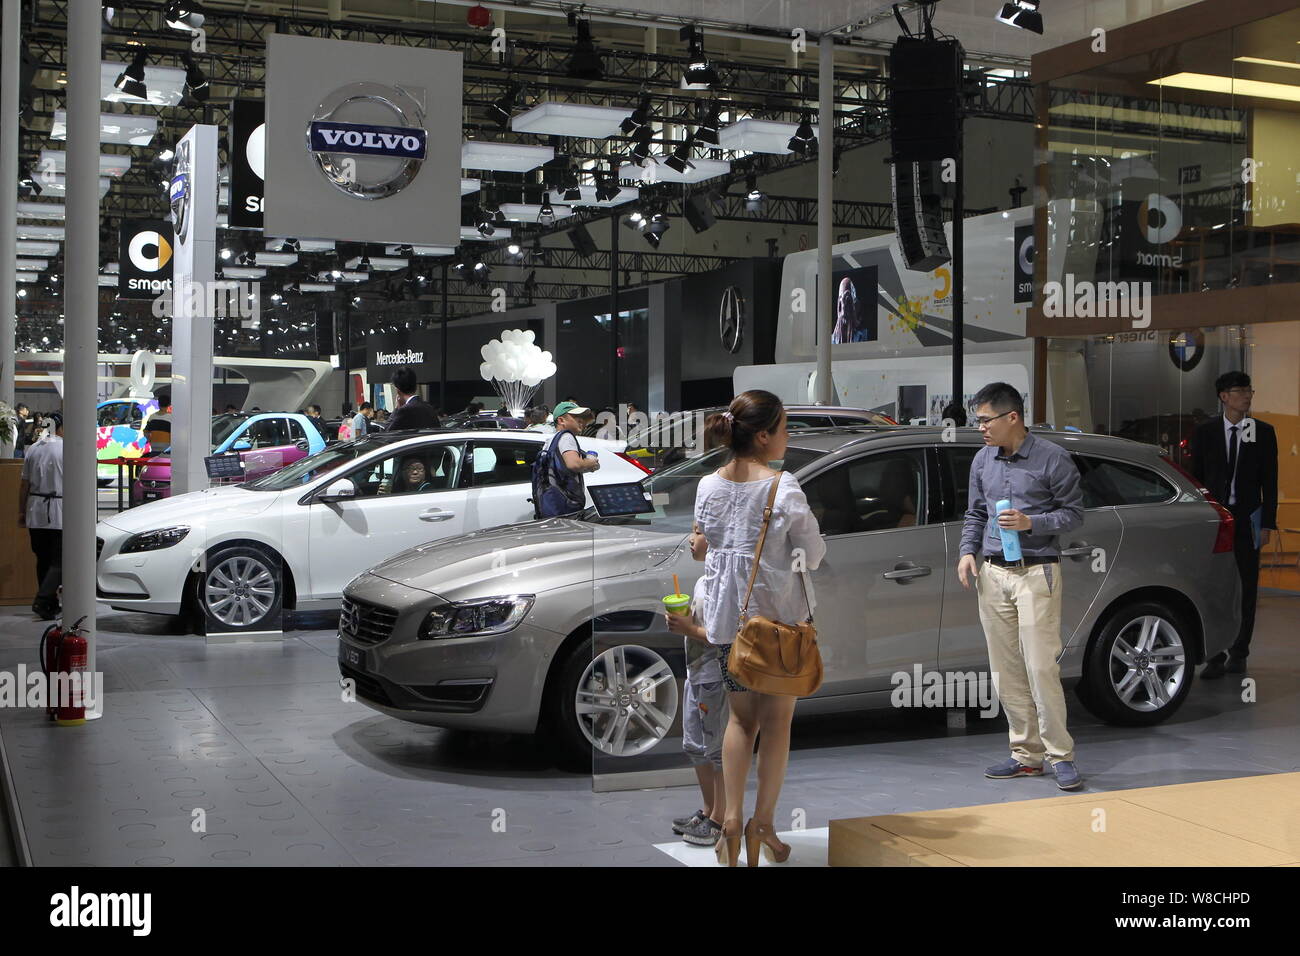 --FILE--People visit the stand of Volvo during an automobile exhibition in Nanjing city, east Chinas Jiangsu province, 3 October 2014.   Sweden-based Stock Photo